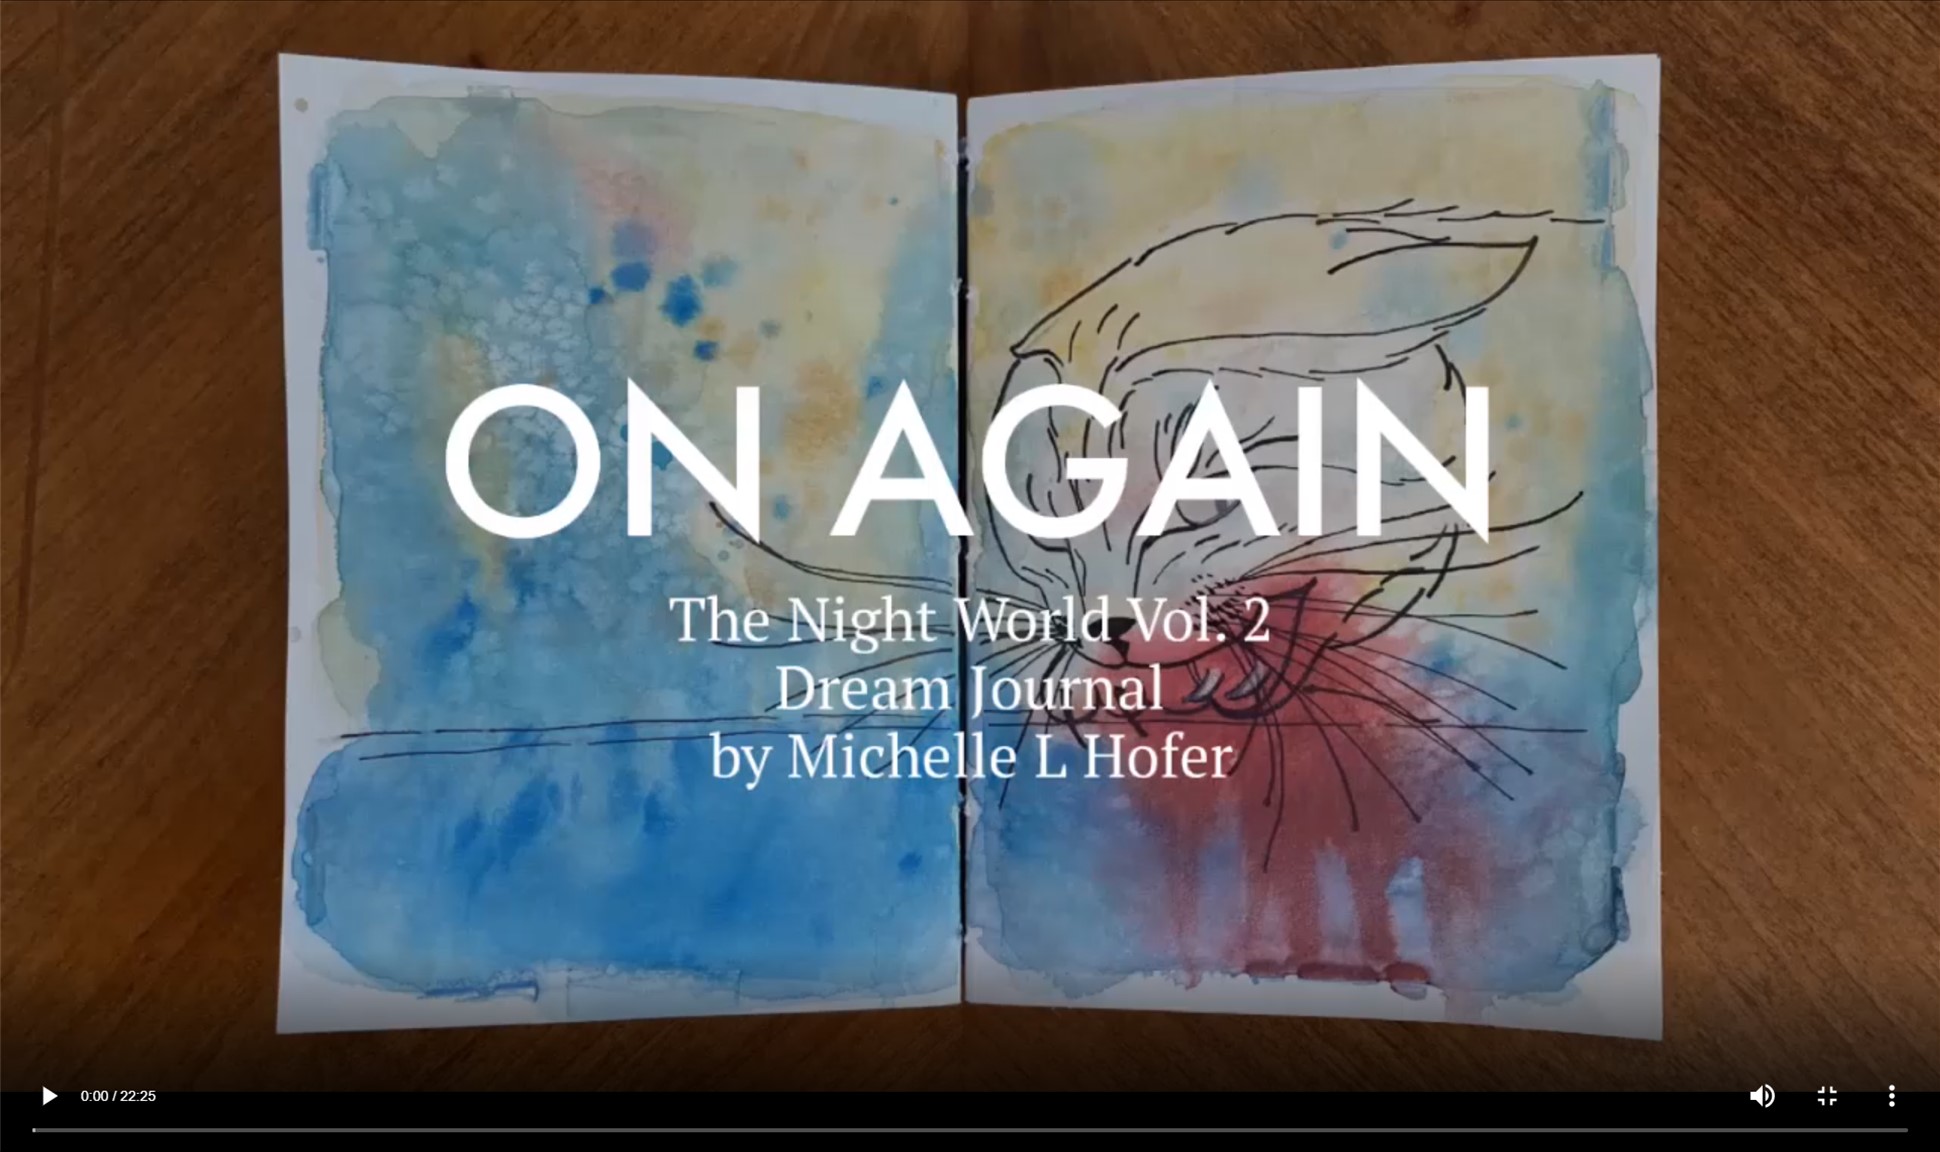 On Again Video Link - The Night World Vol. 2 Dream Journal by Michelle L Hofer